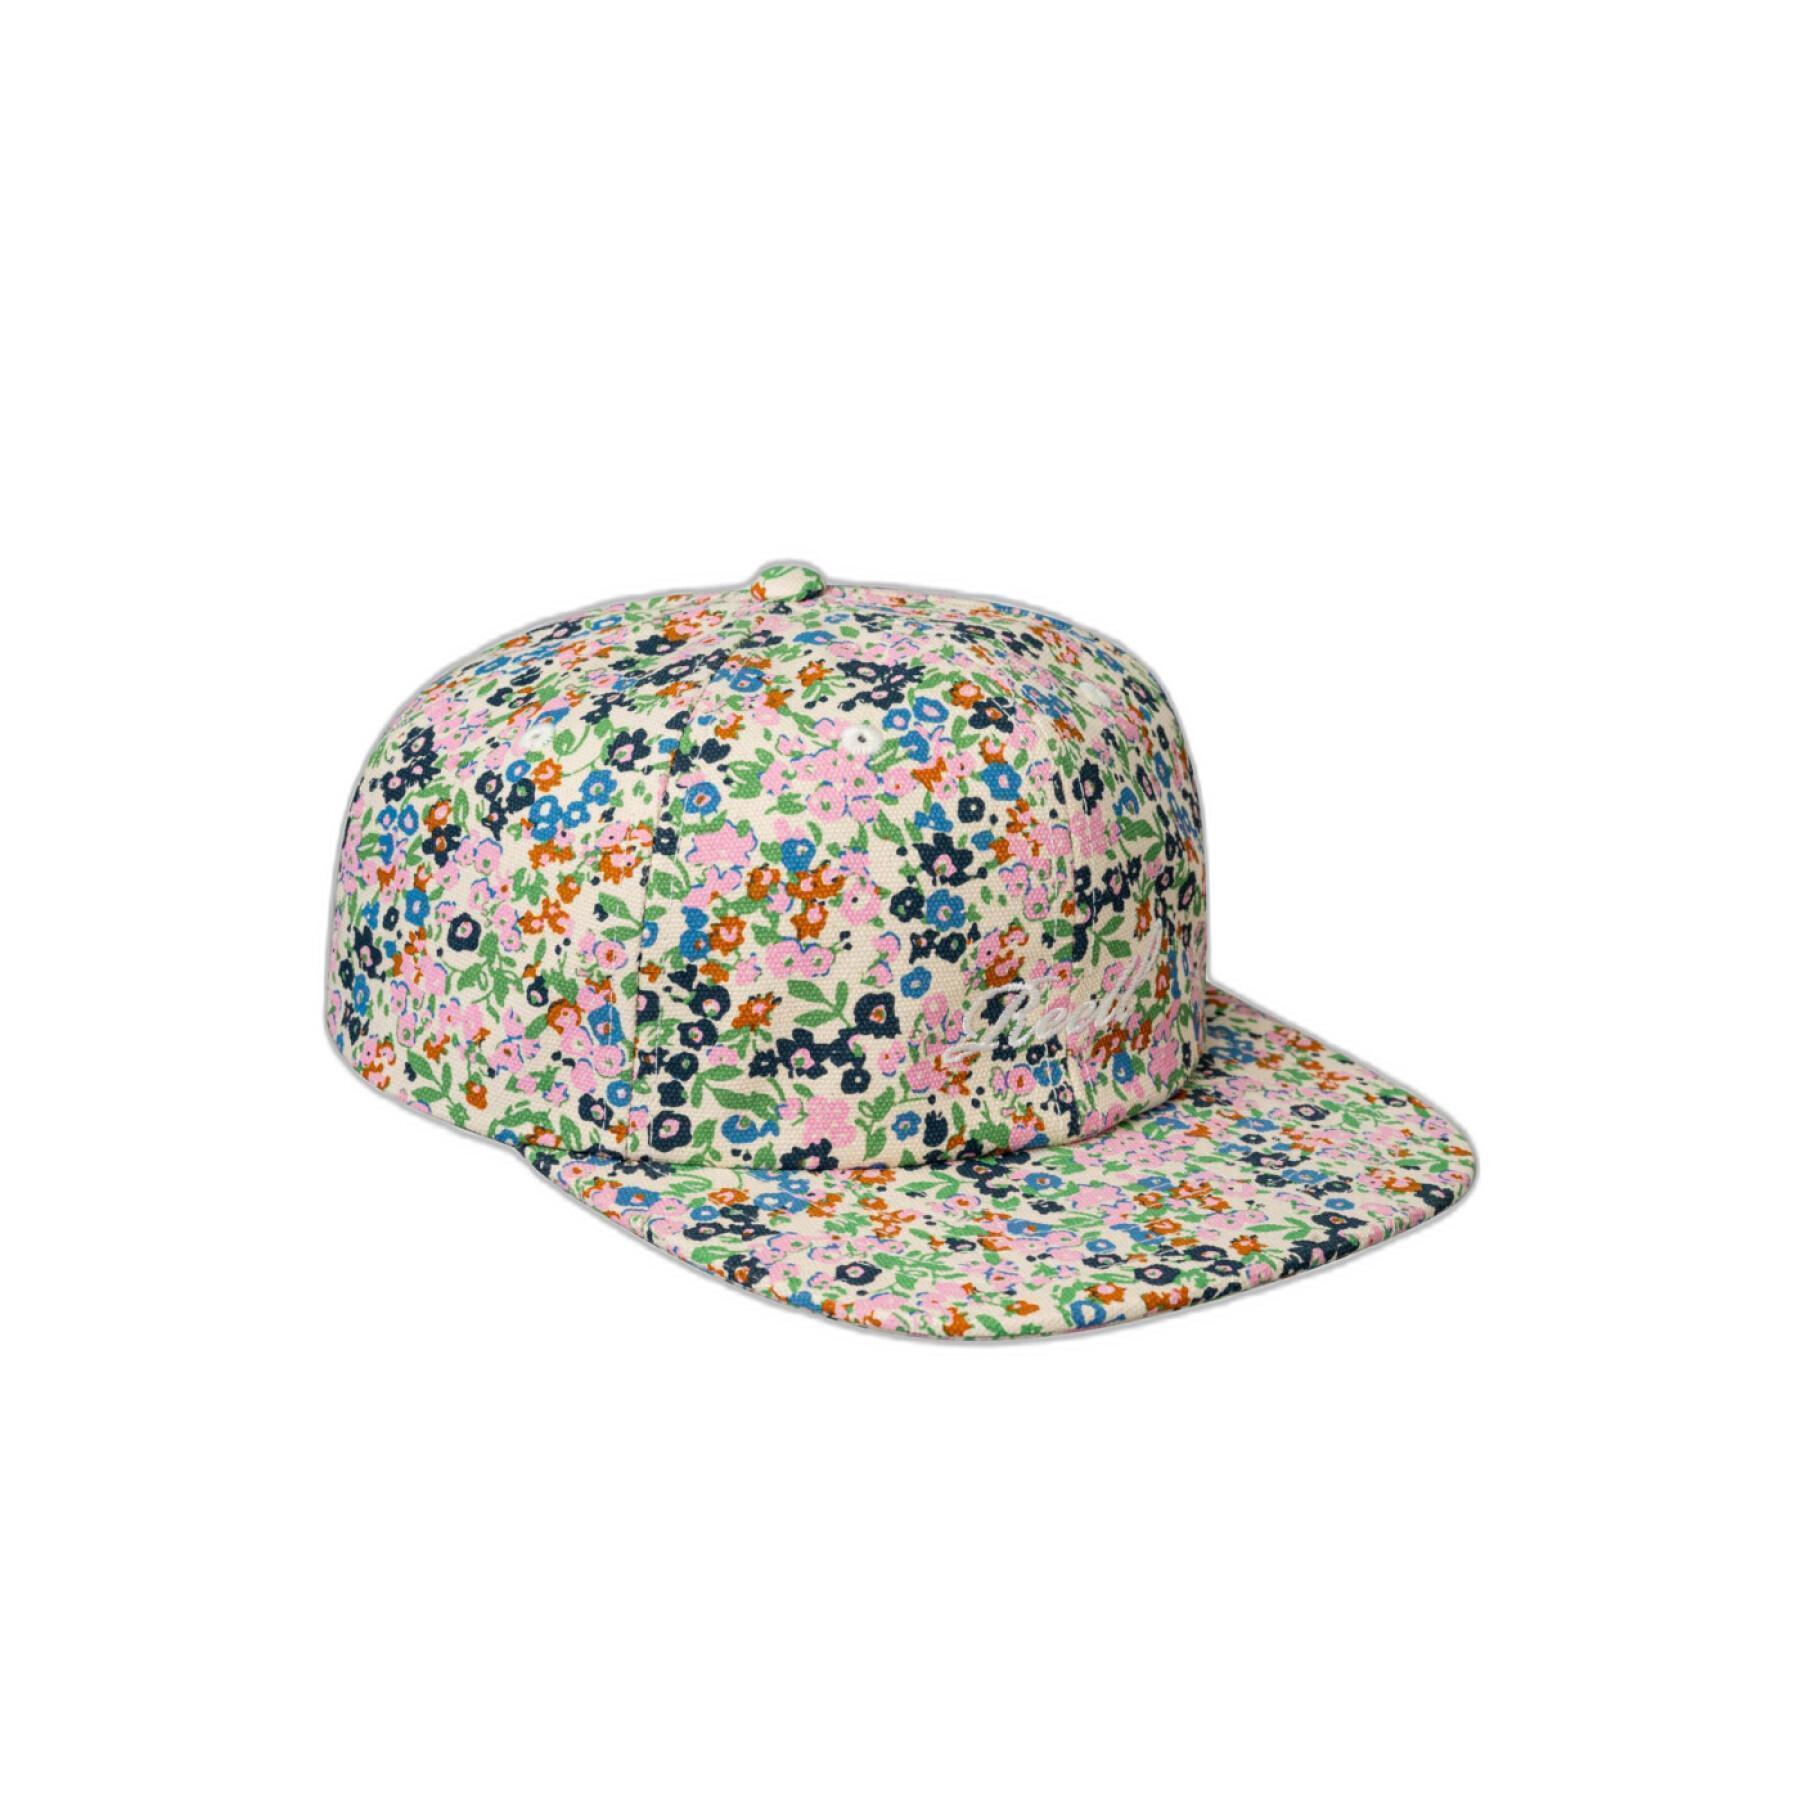 Gorra Reell Low Pitch